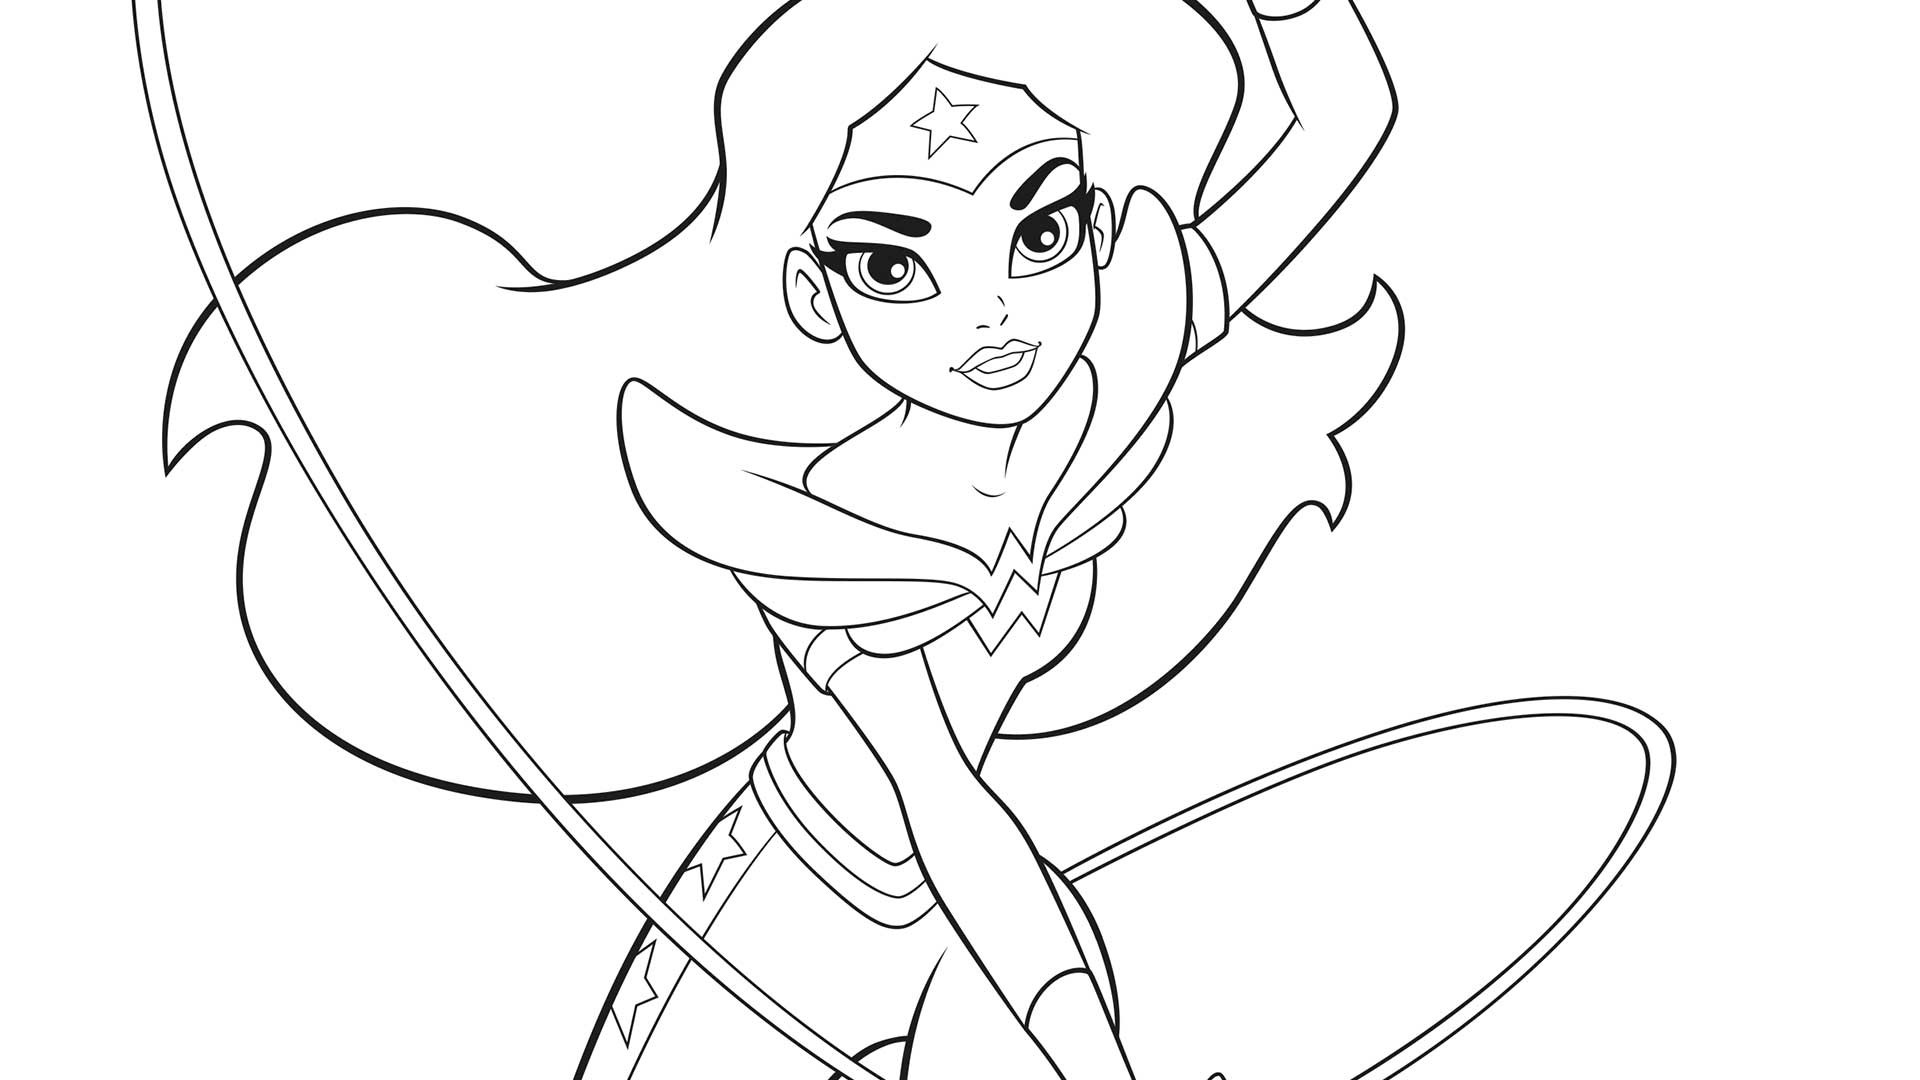 Super Hero Girls Coloring Pages
 DC SUPER HERO GIRLS A KIDS COLORING BOOK